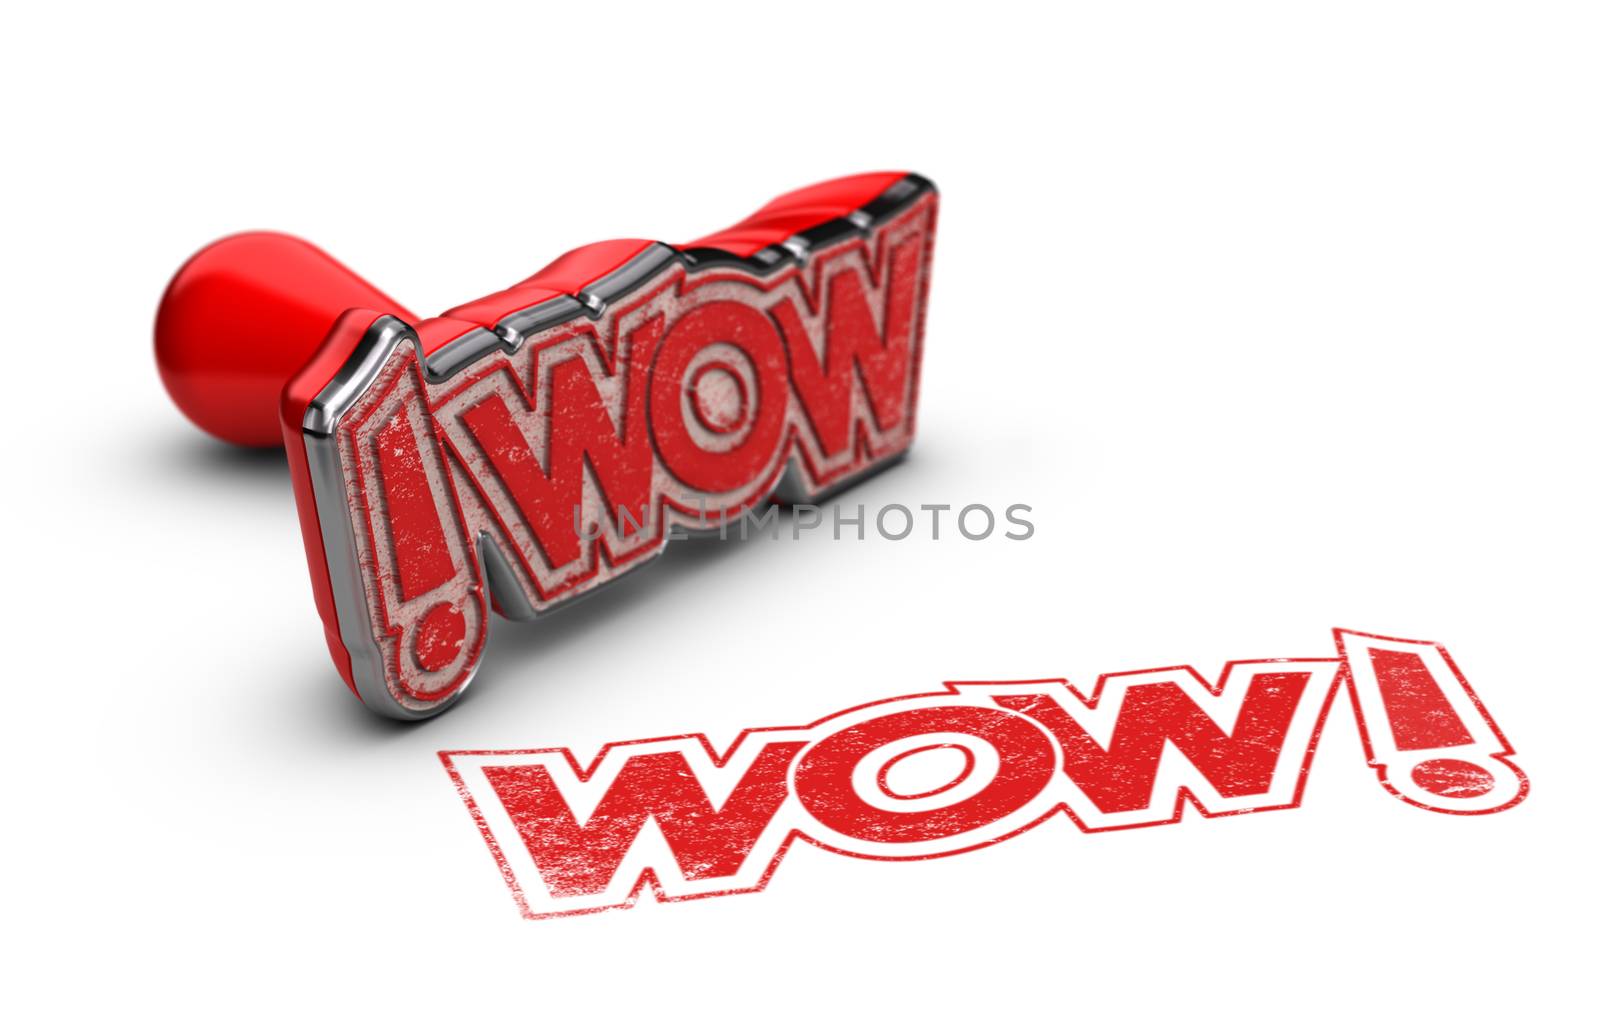 WOW rubber stamp over white background, exclamation concept for illustration of surprise or incredible news